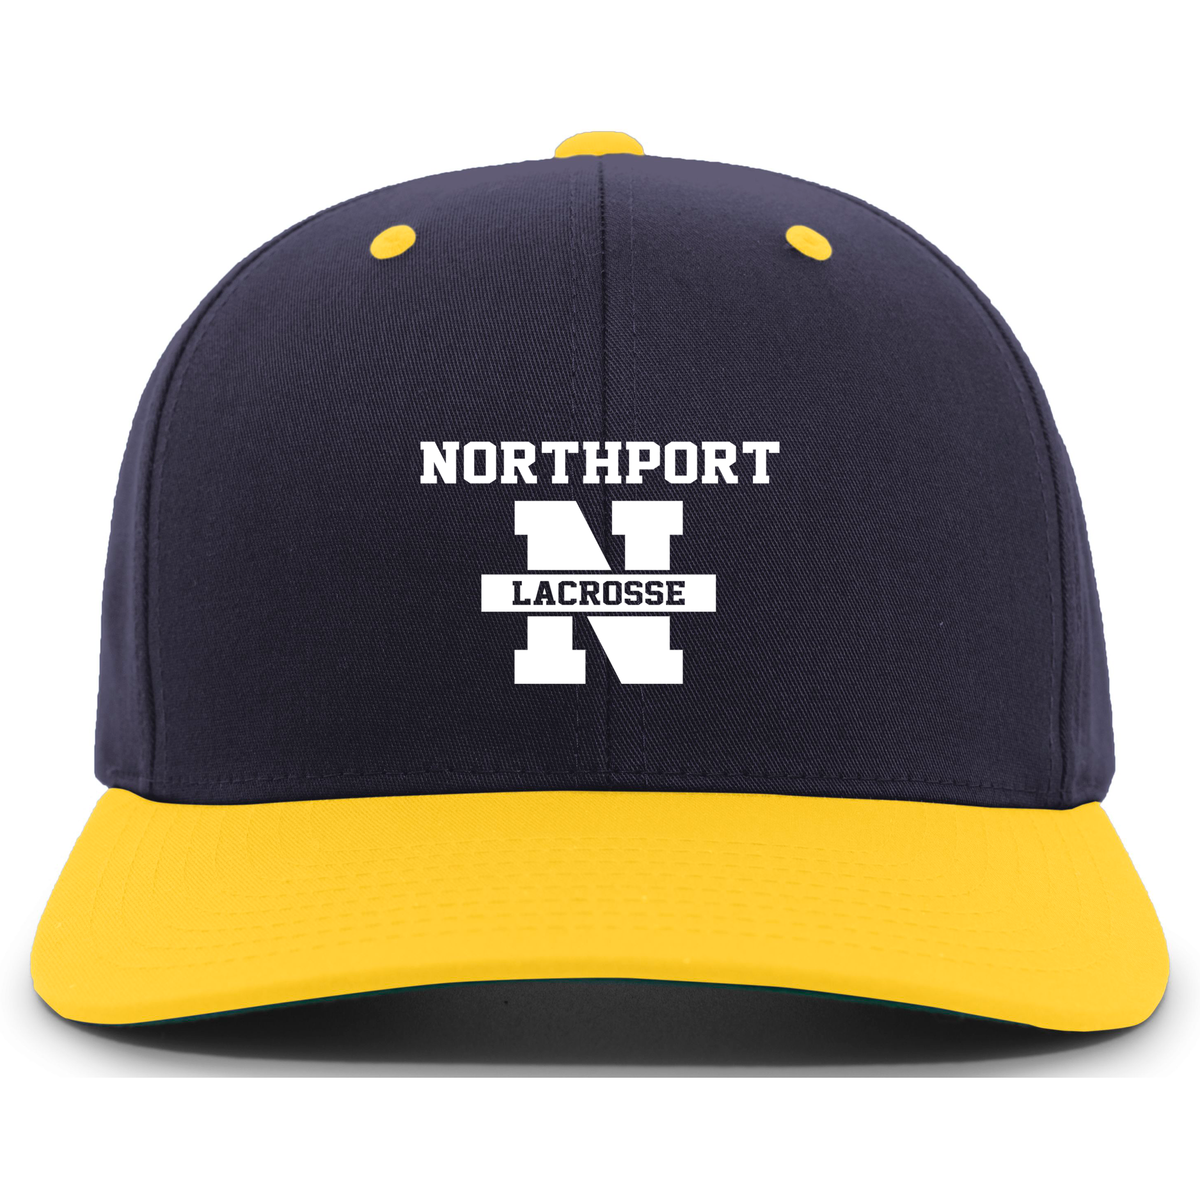 Northport High School Lacrosse Cotton-Poly Hook and Look Adjustable Cap